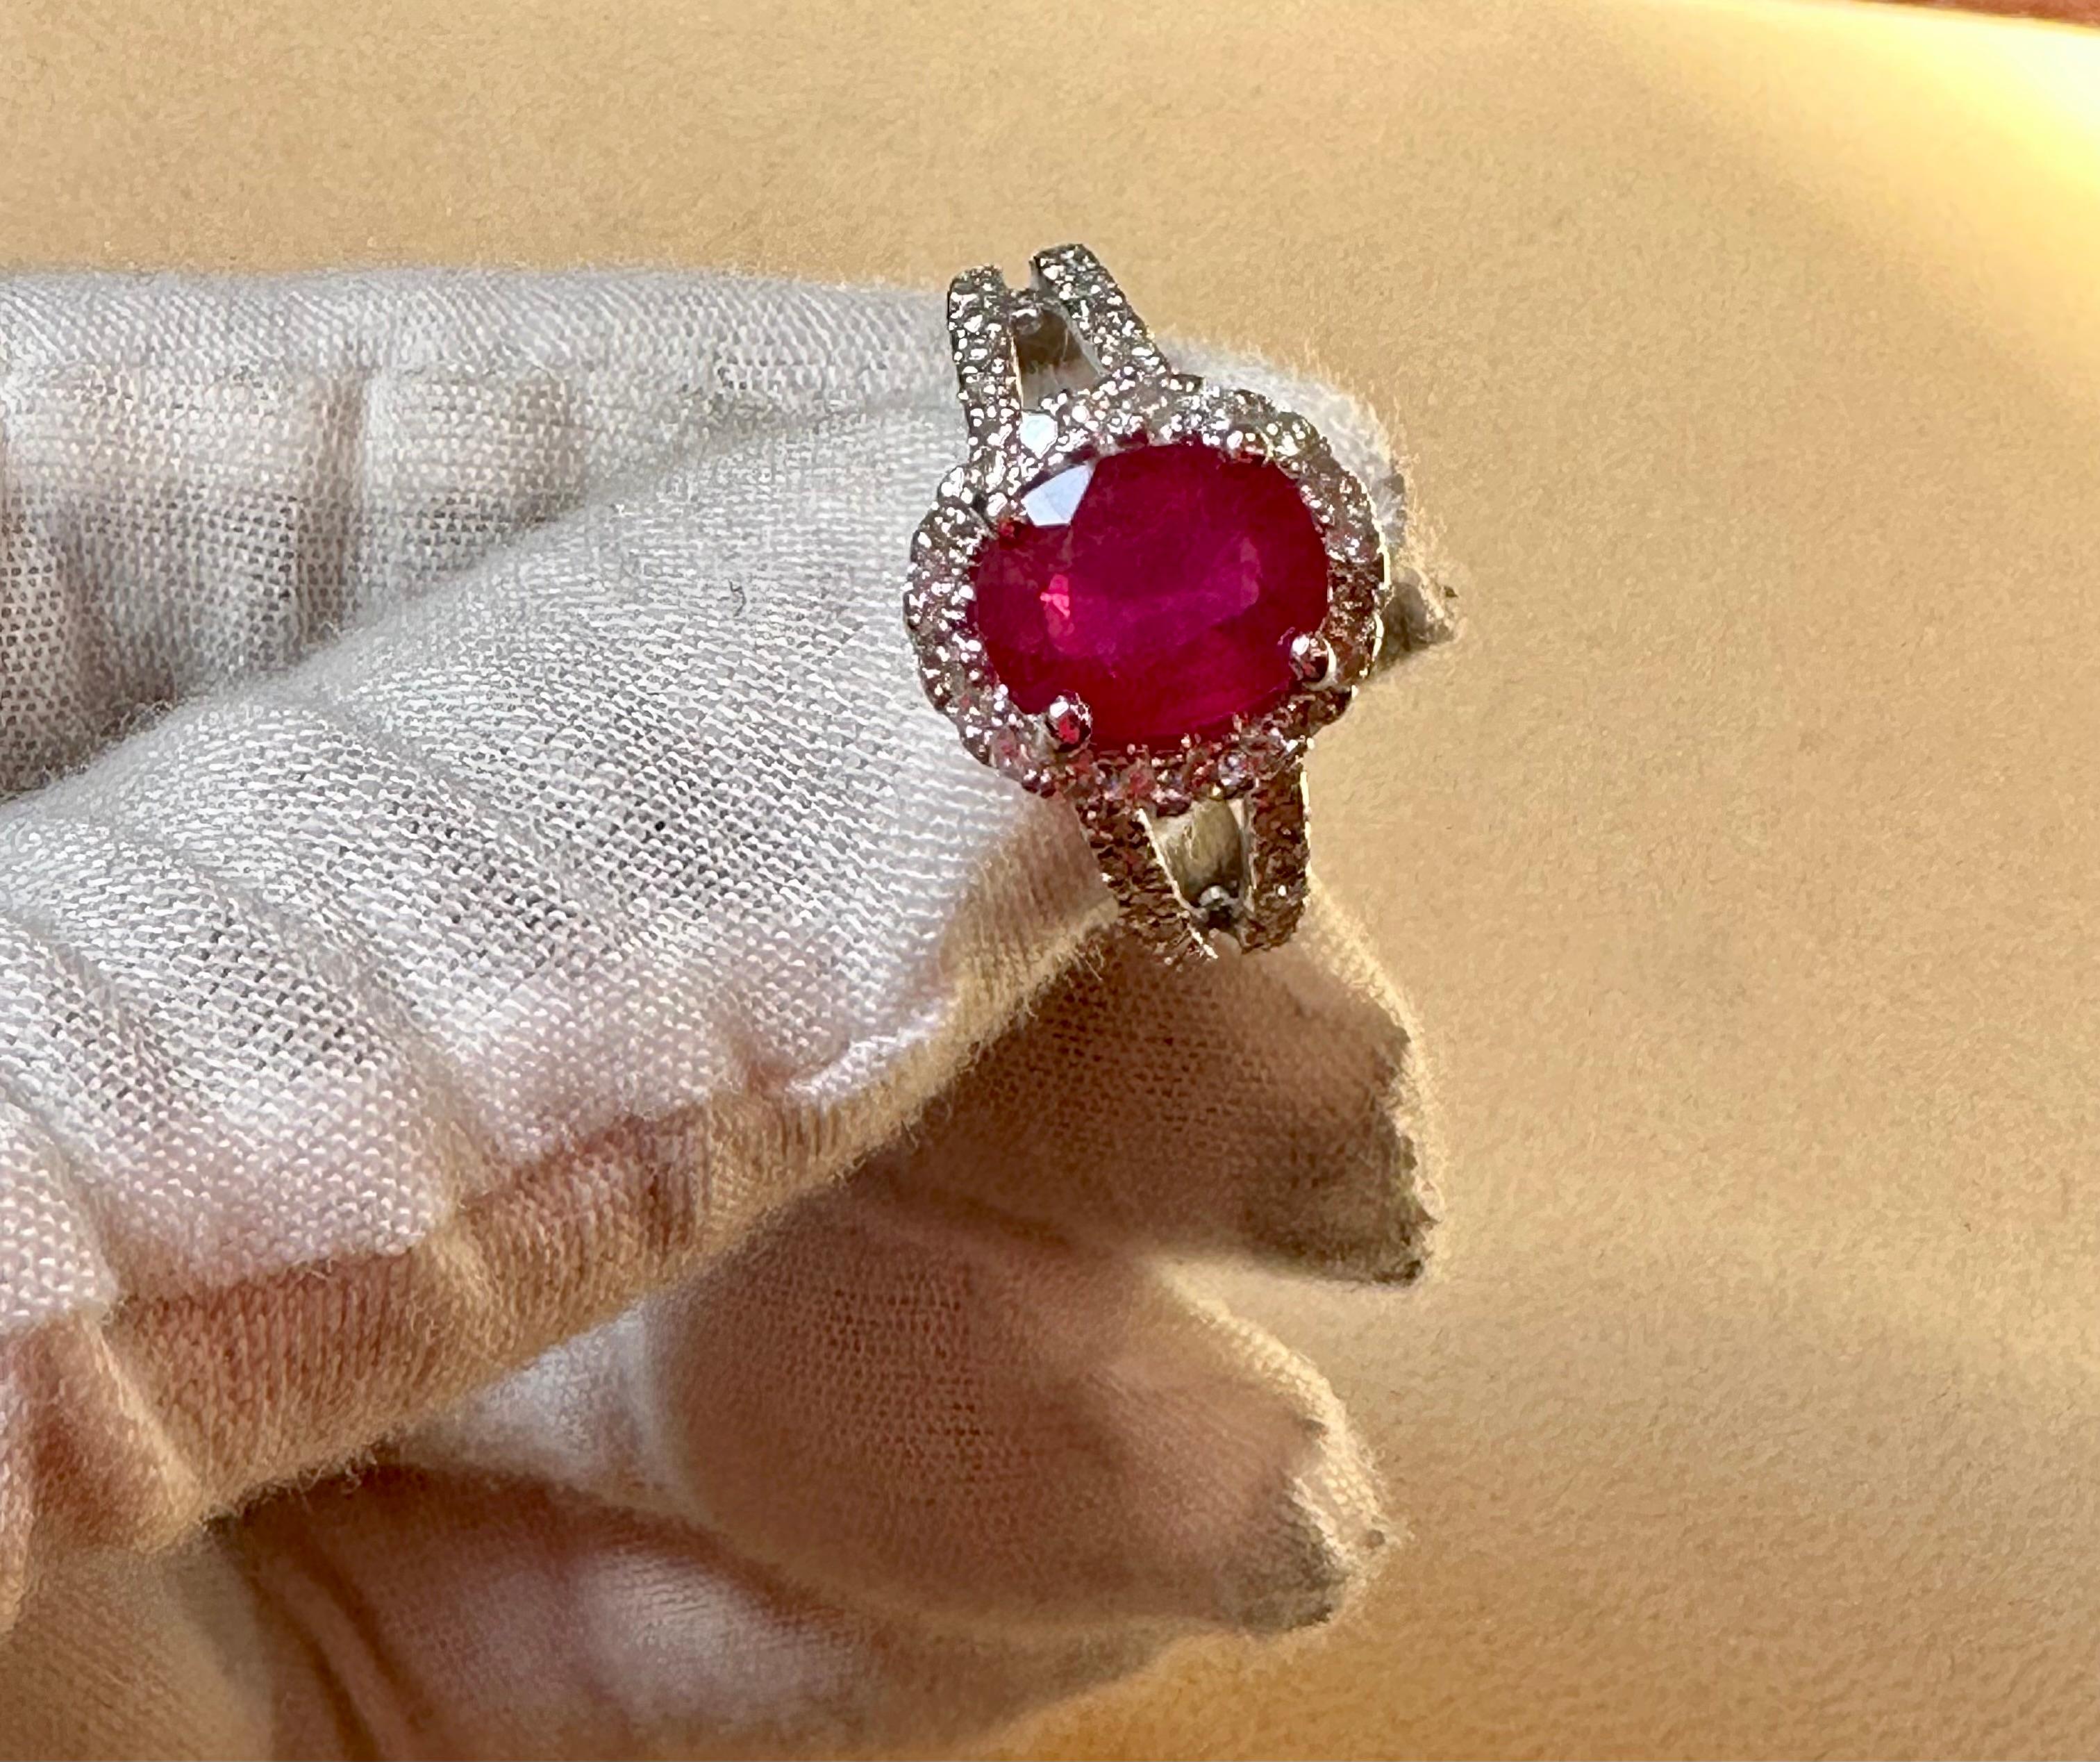 2.5 Carat Oval Treated Ruby & 2 ct Diamond Ring 14 Karat White Gold Size 7 For Sale 4